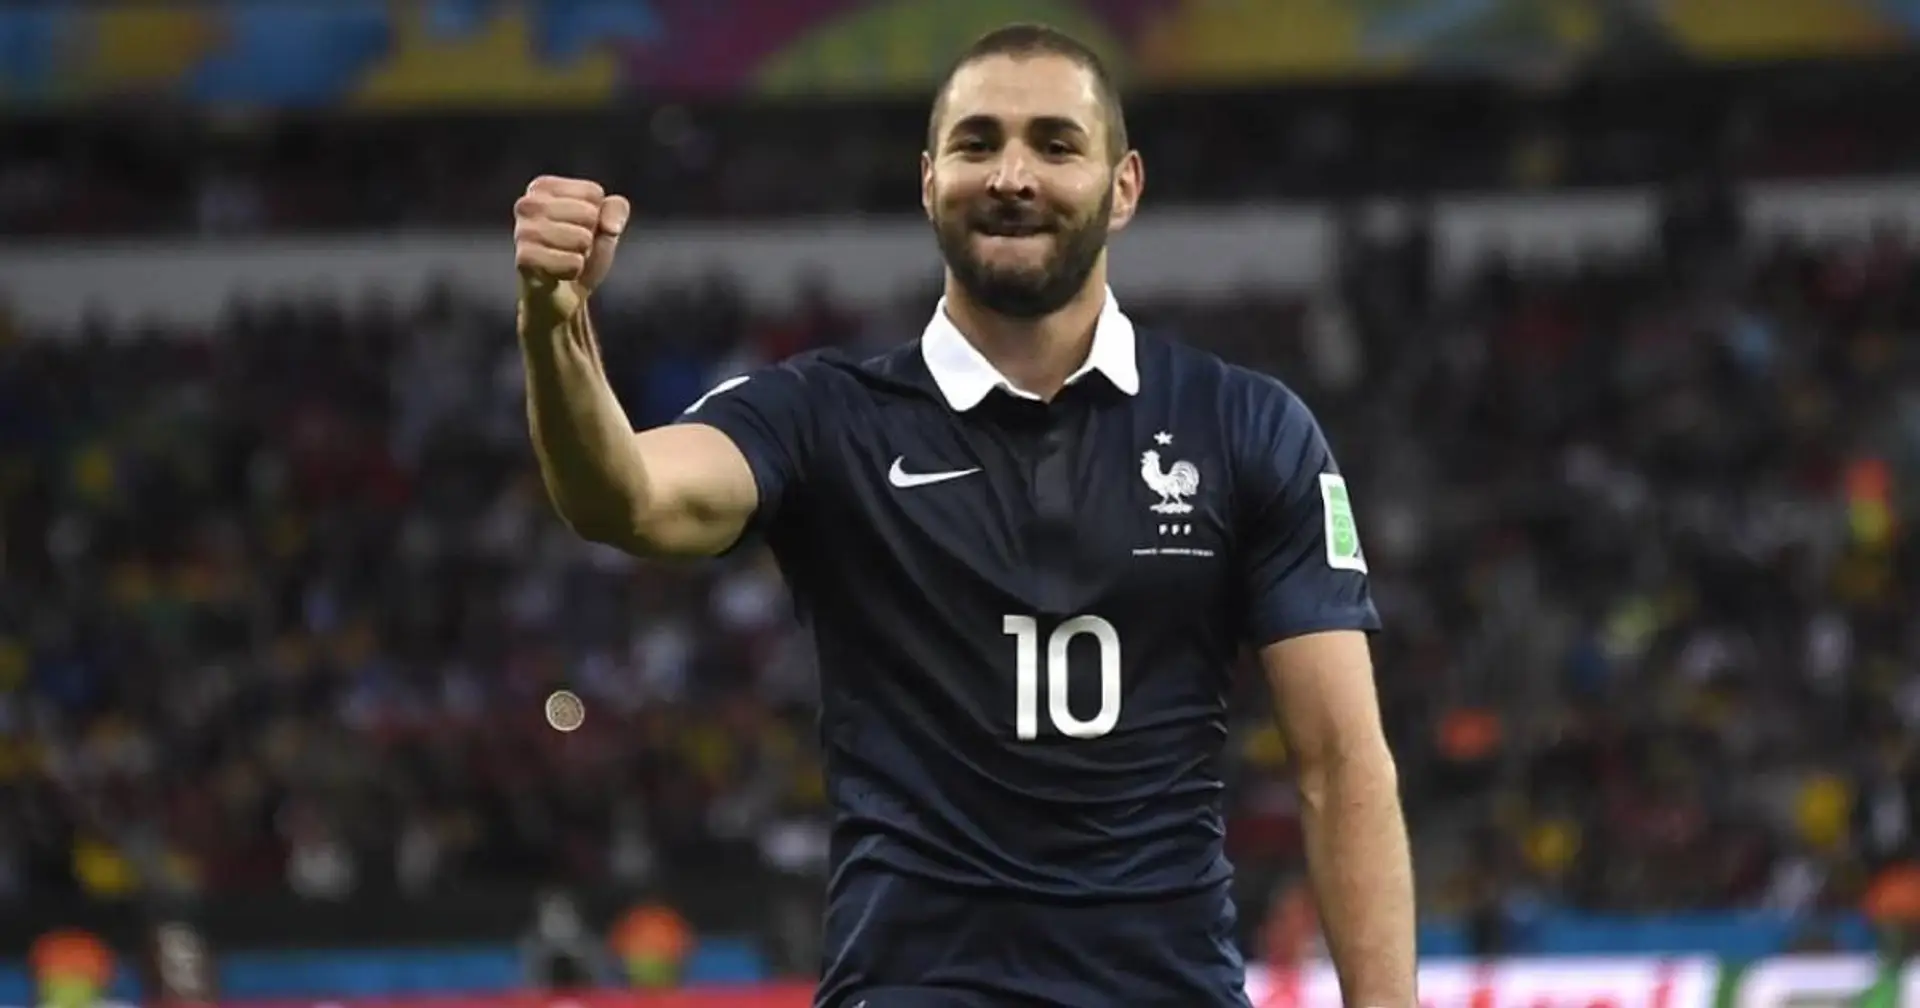 Benzema included in French squad for upcoming Euros - it's his 1st call-up since 2015